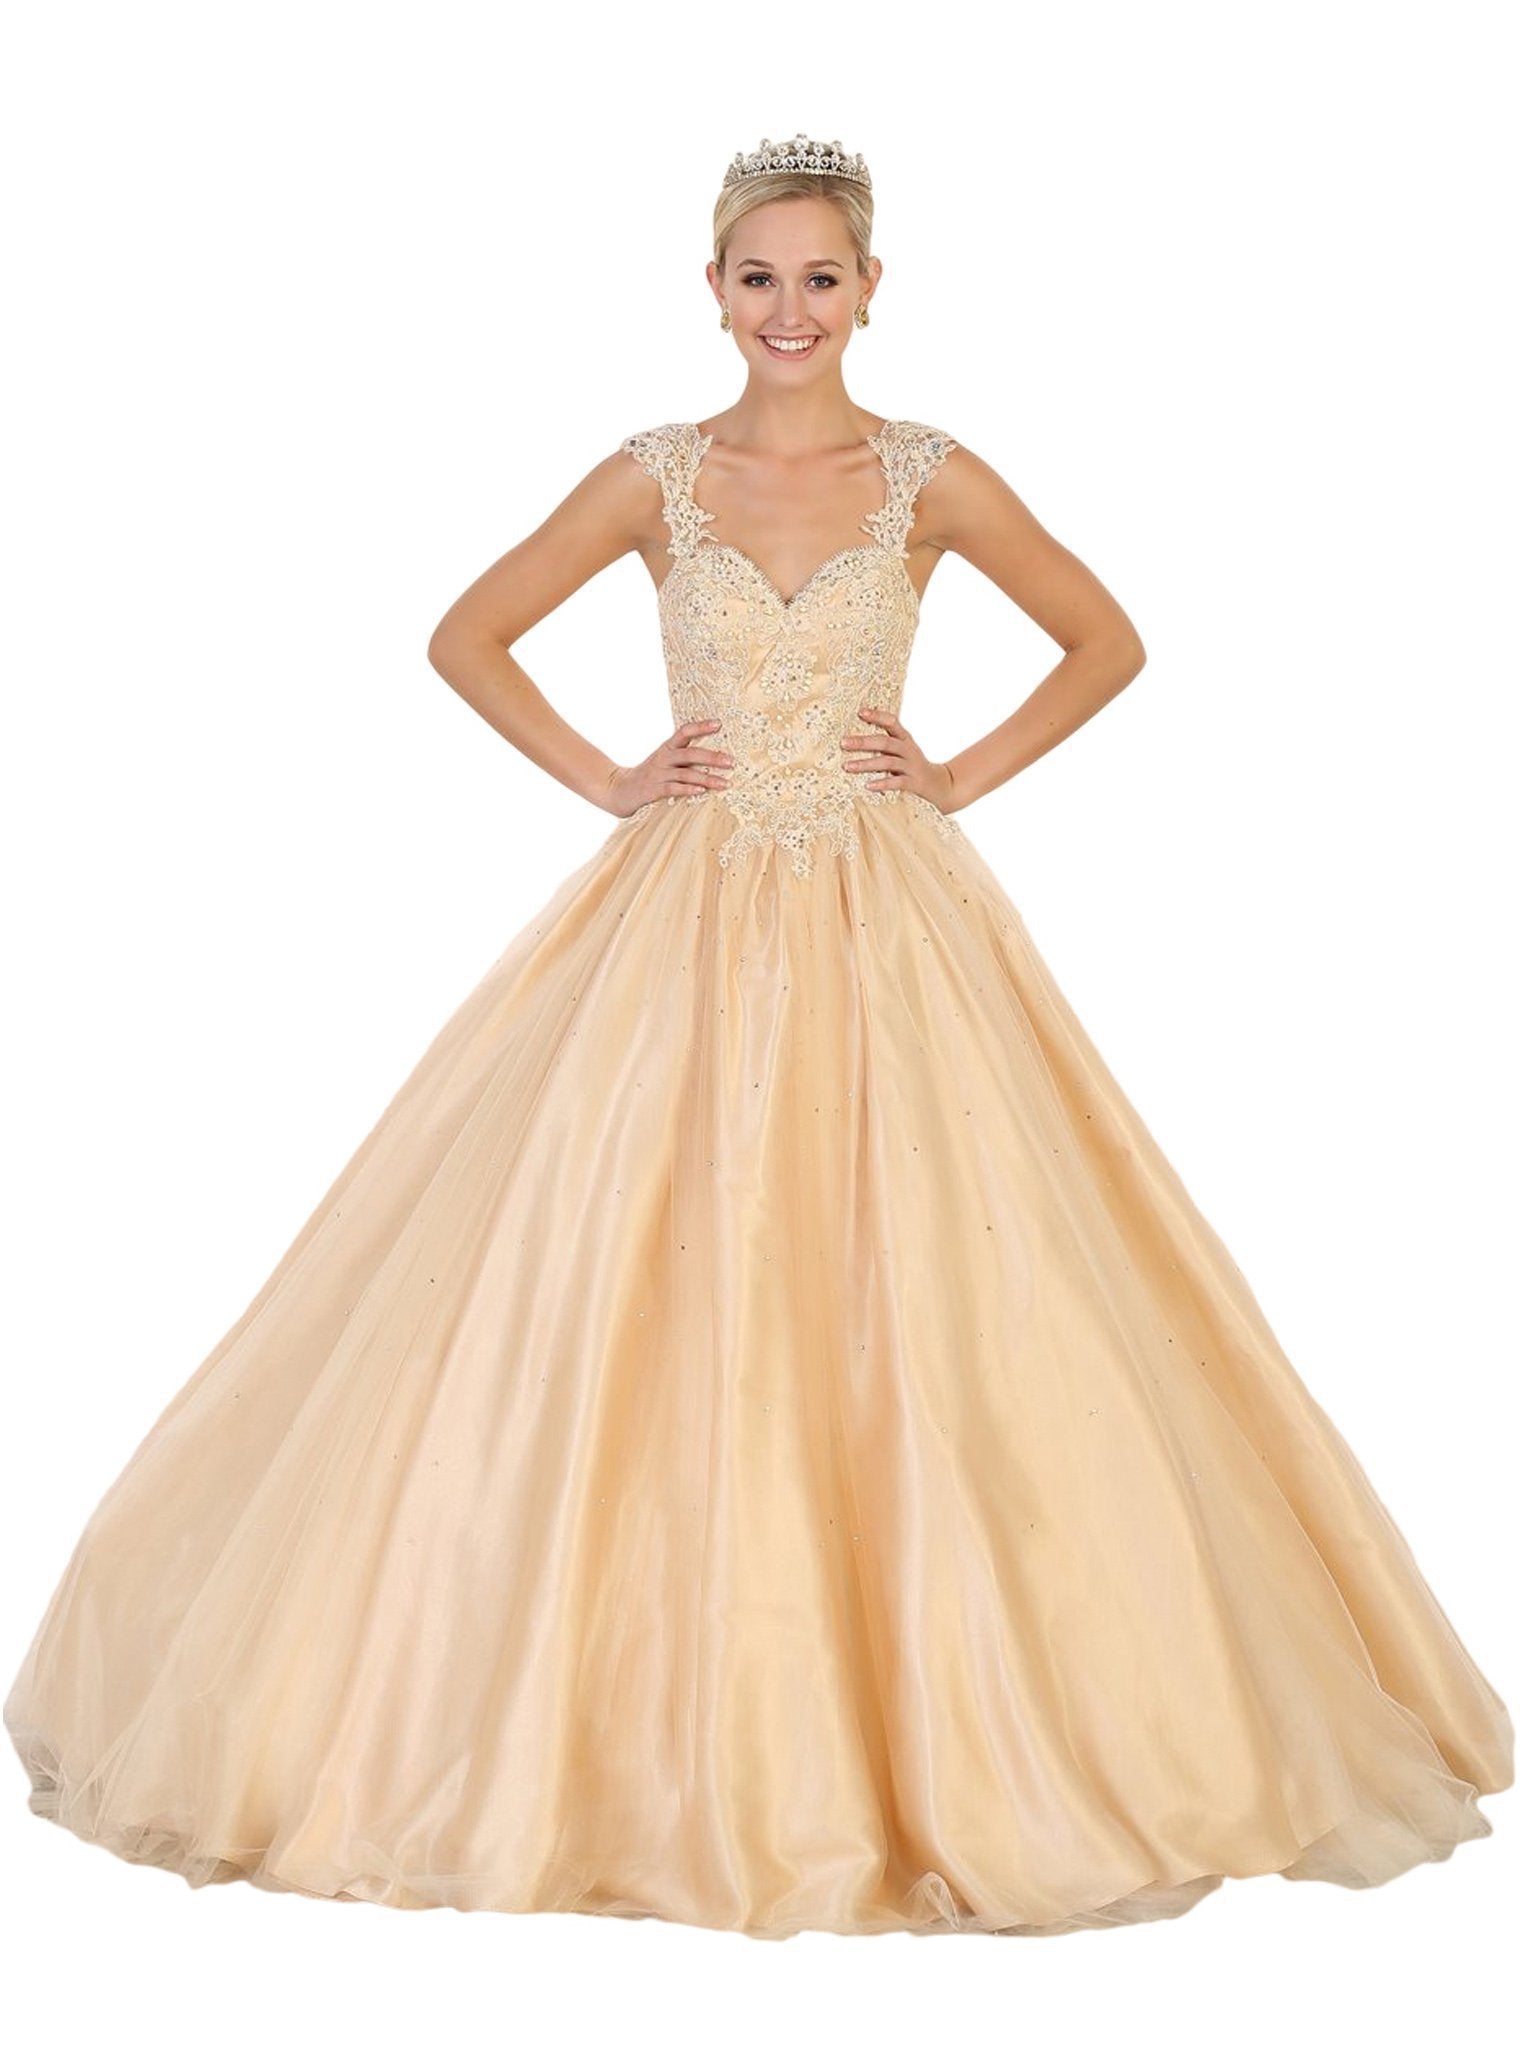 May Queen - Beaded Lace Plunging Sweetheart Quinceanera Ballgown
